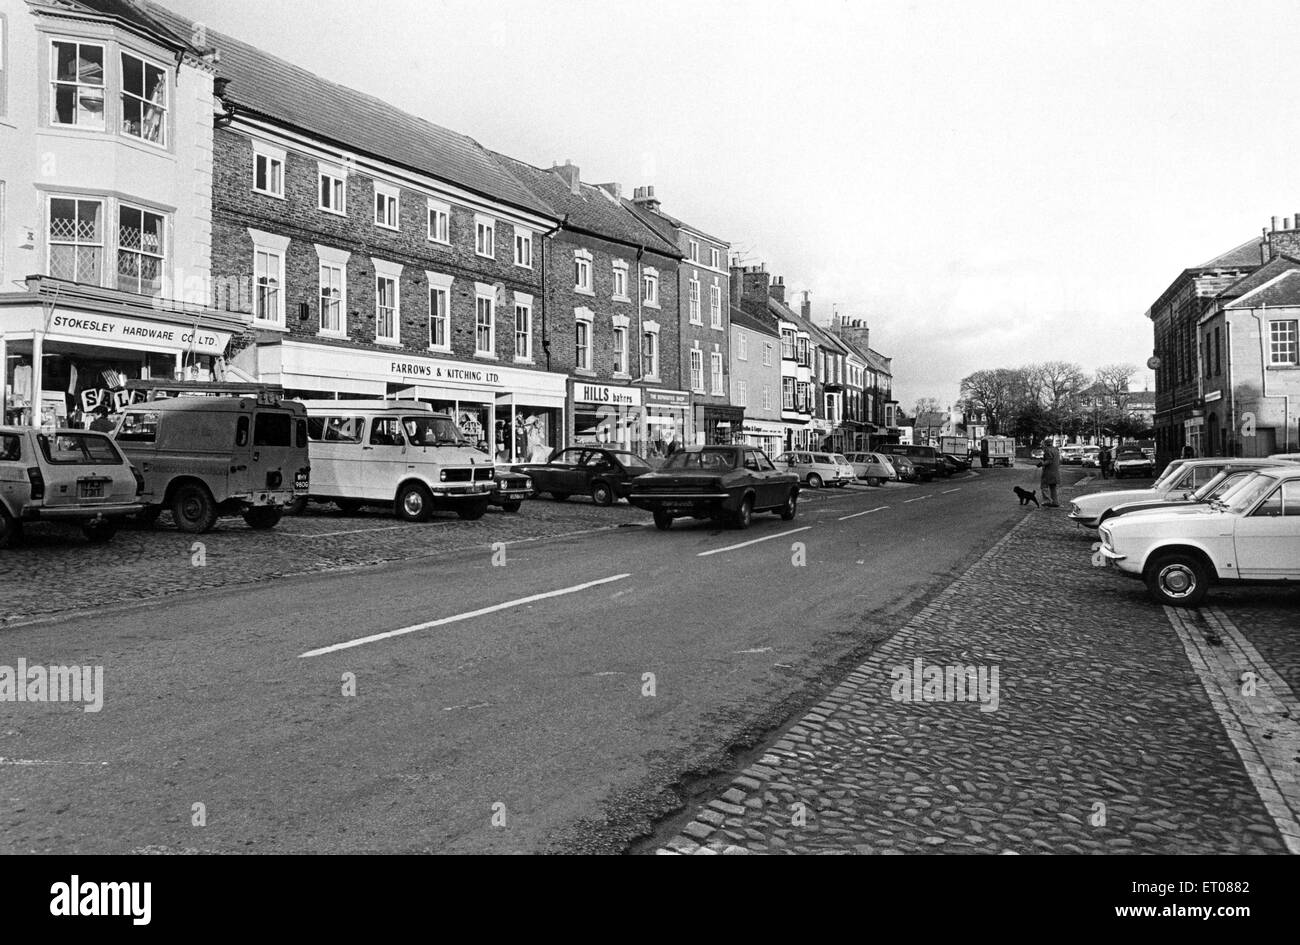 The characteristic cobblestones and building frontages of the main street in Stokesley, North Yorkshire. Still a market town - but for how long?. 3rd December 1979. Stock Photo